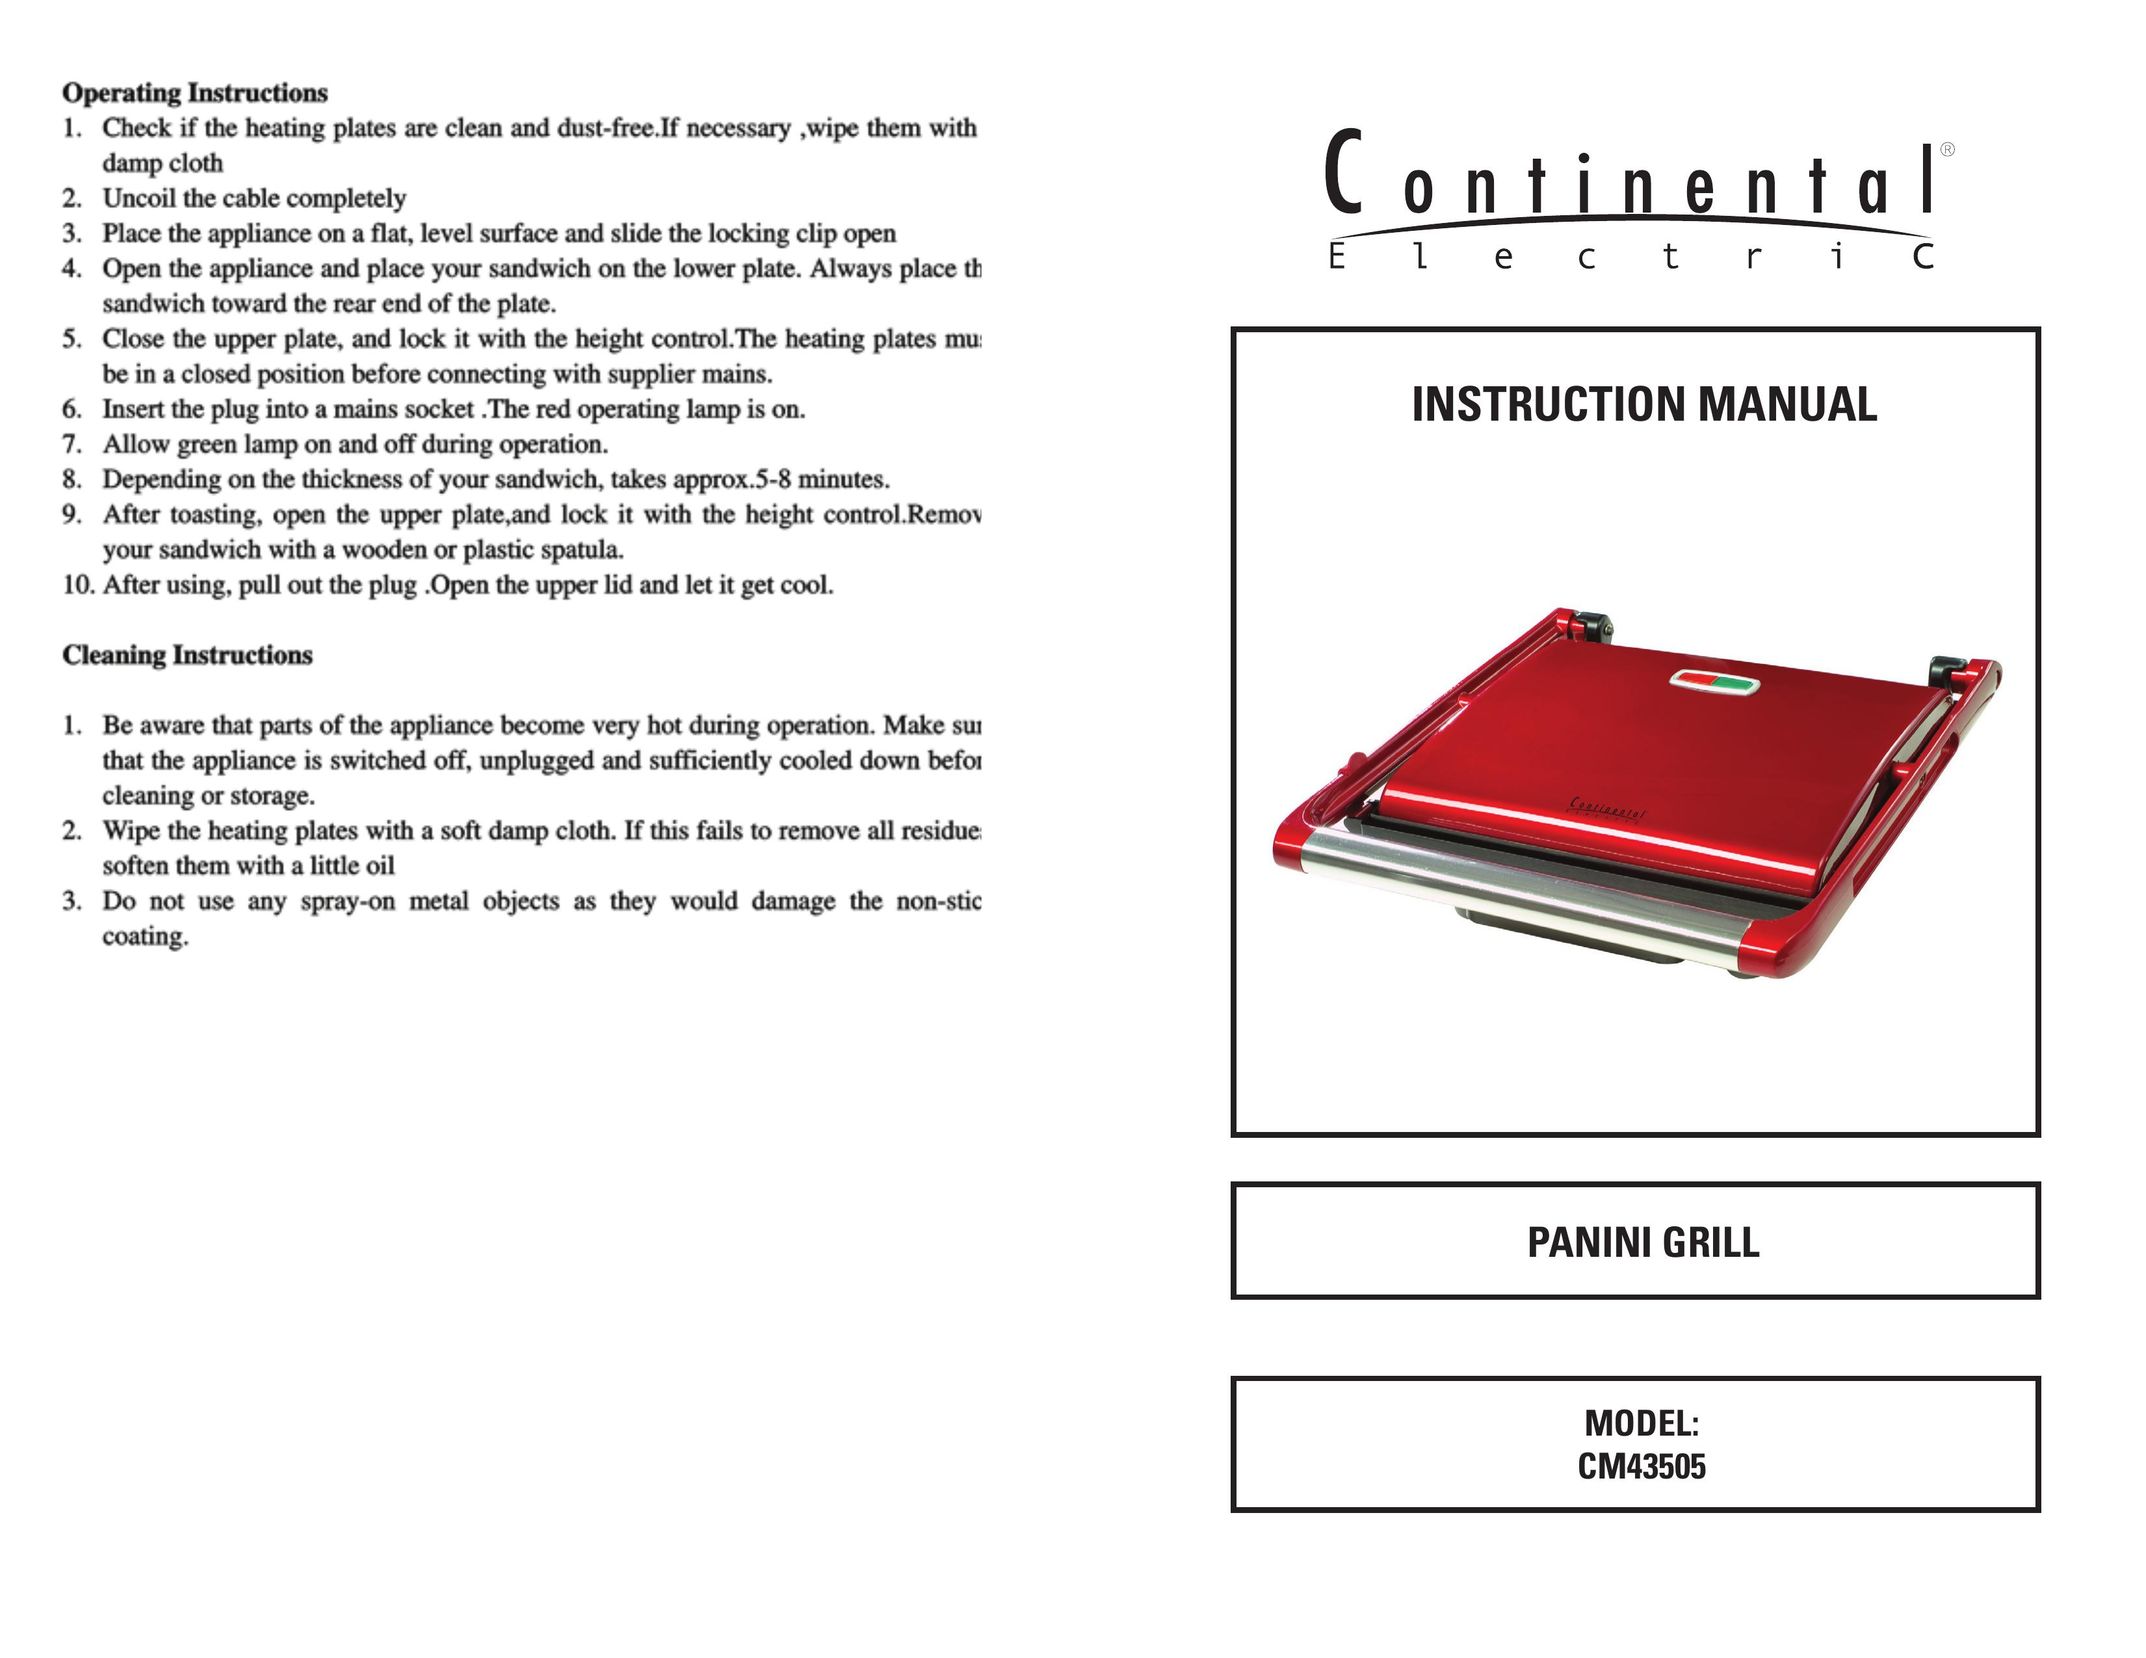 Continental CM43505 Kitchen Grill User Manual